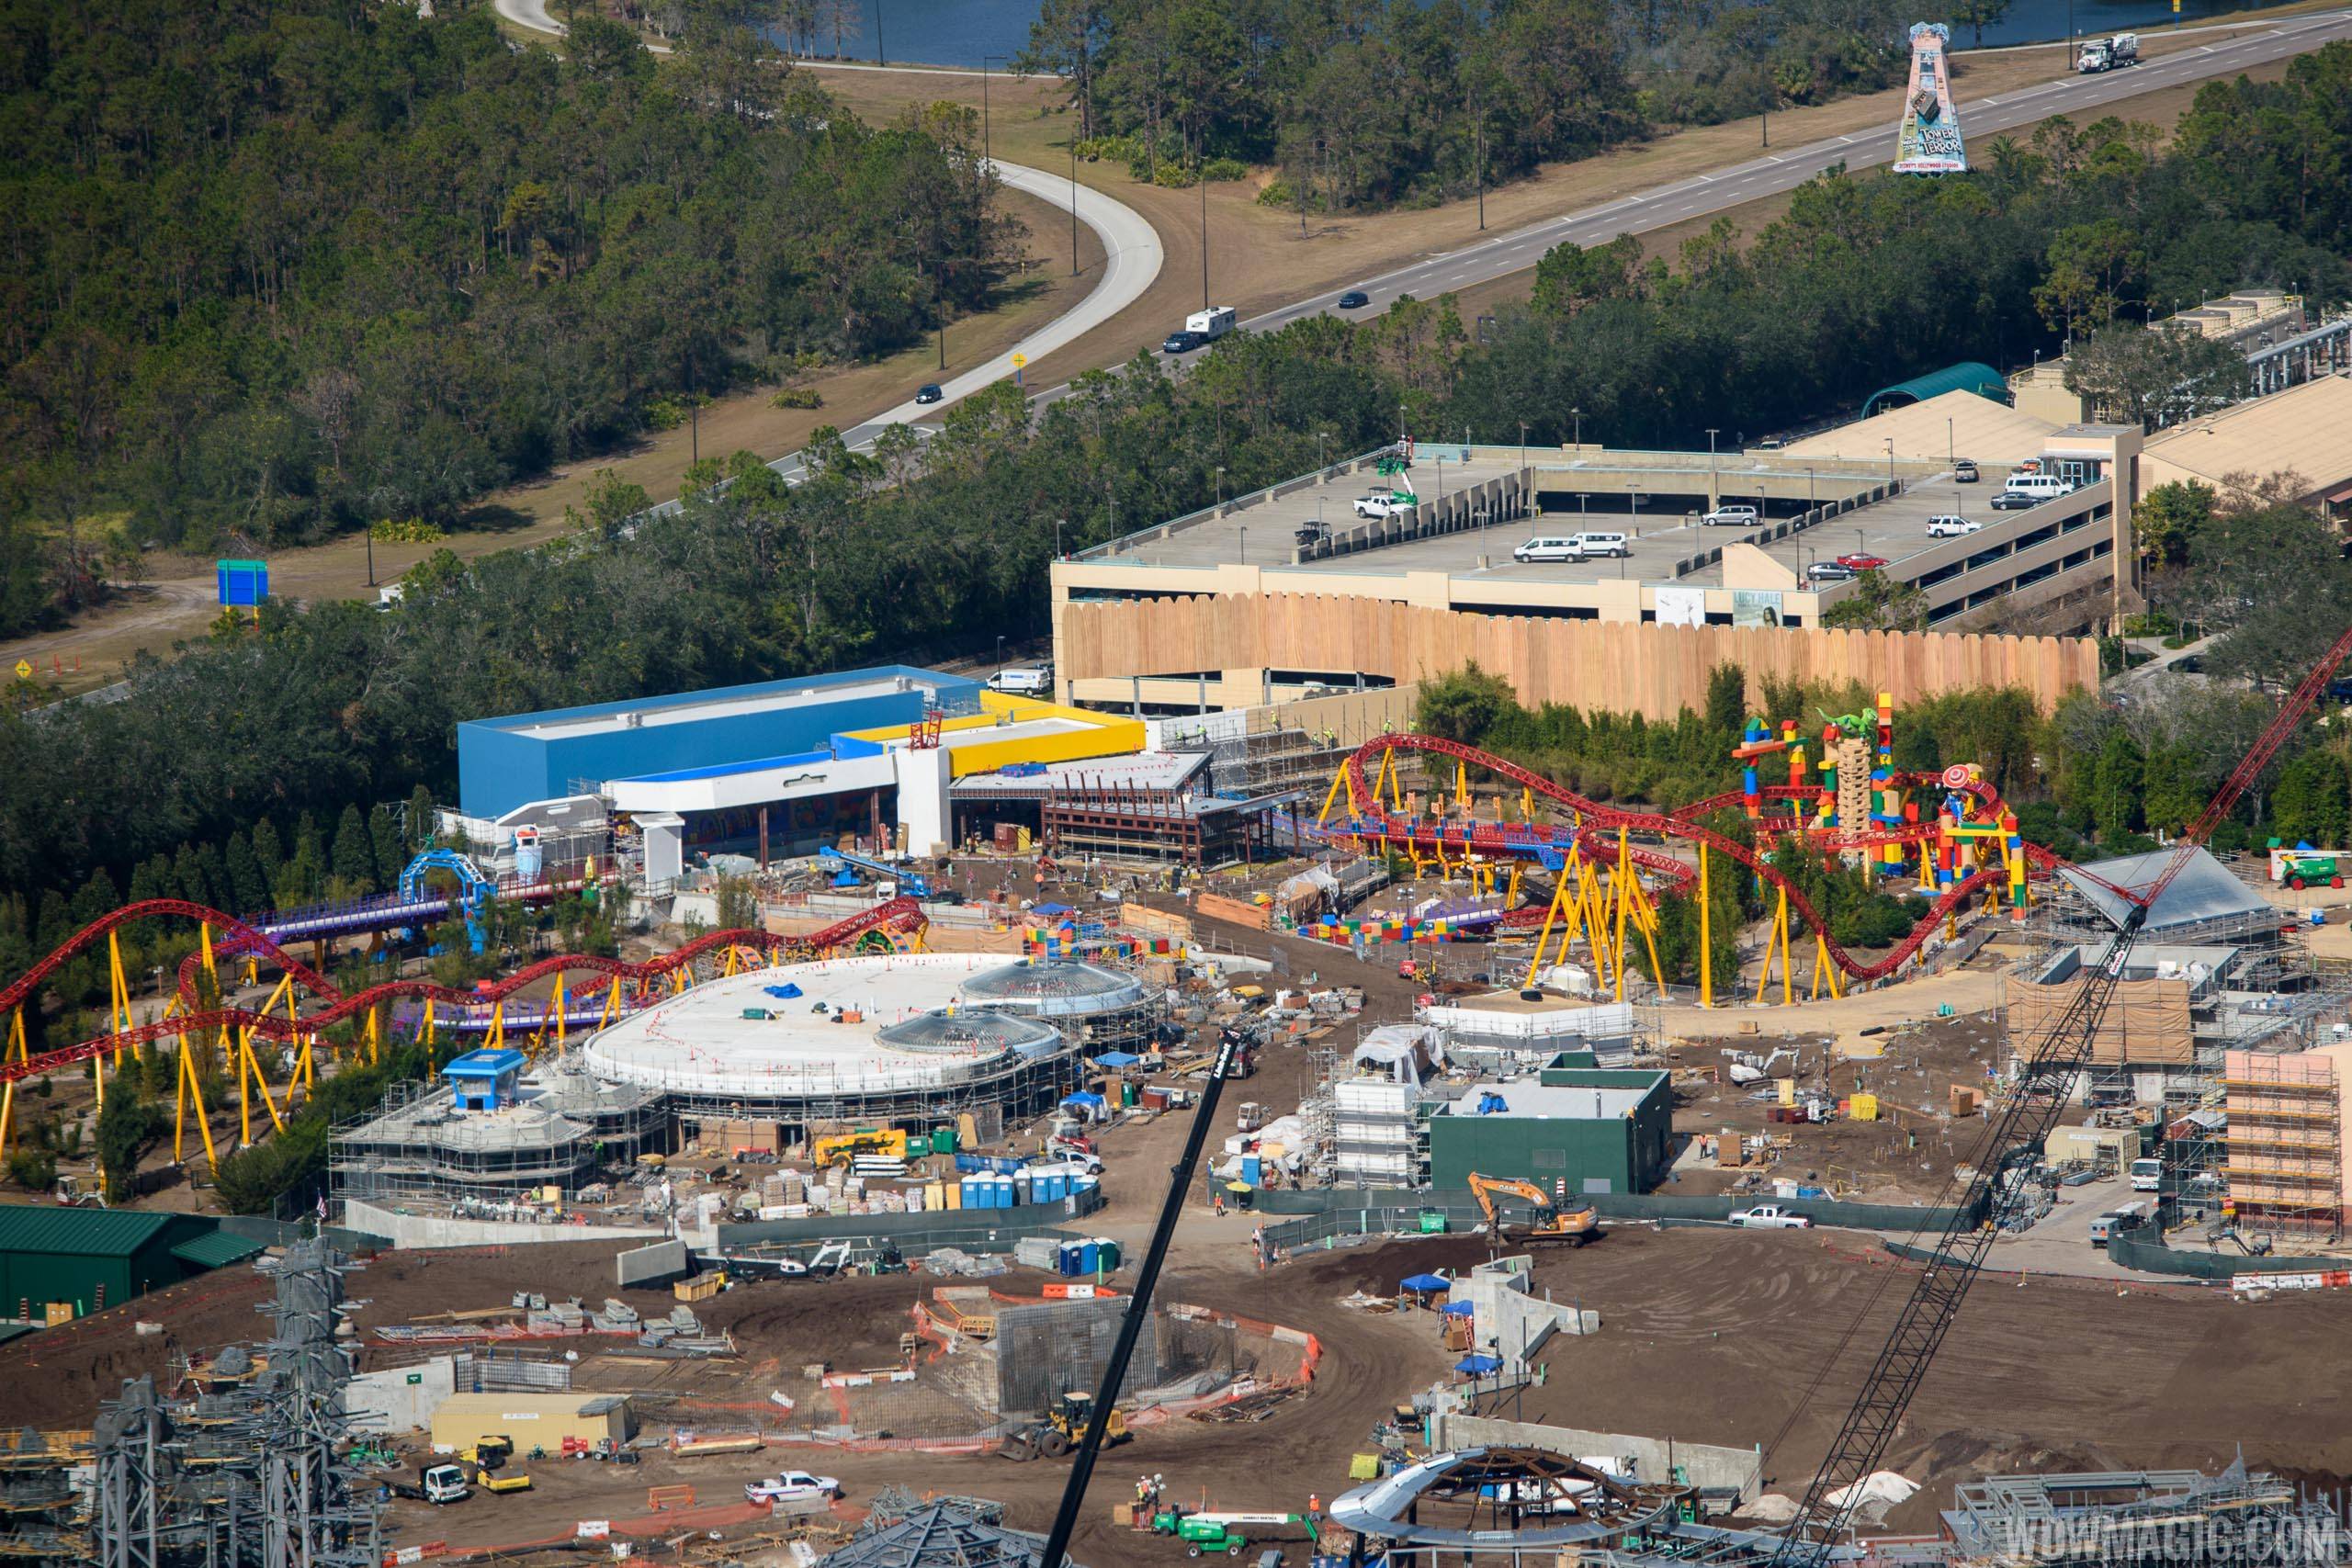 PHOTOS - Toy Story Land construction from the air